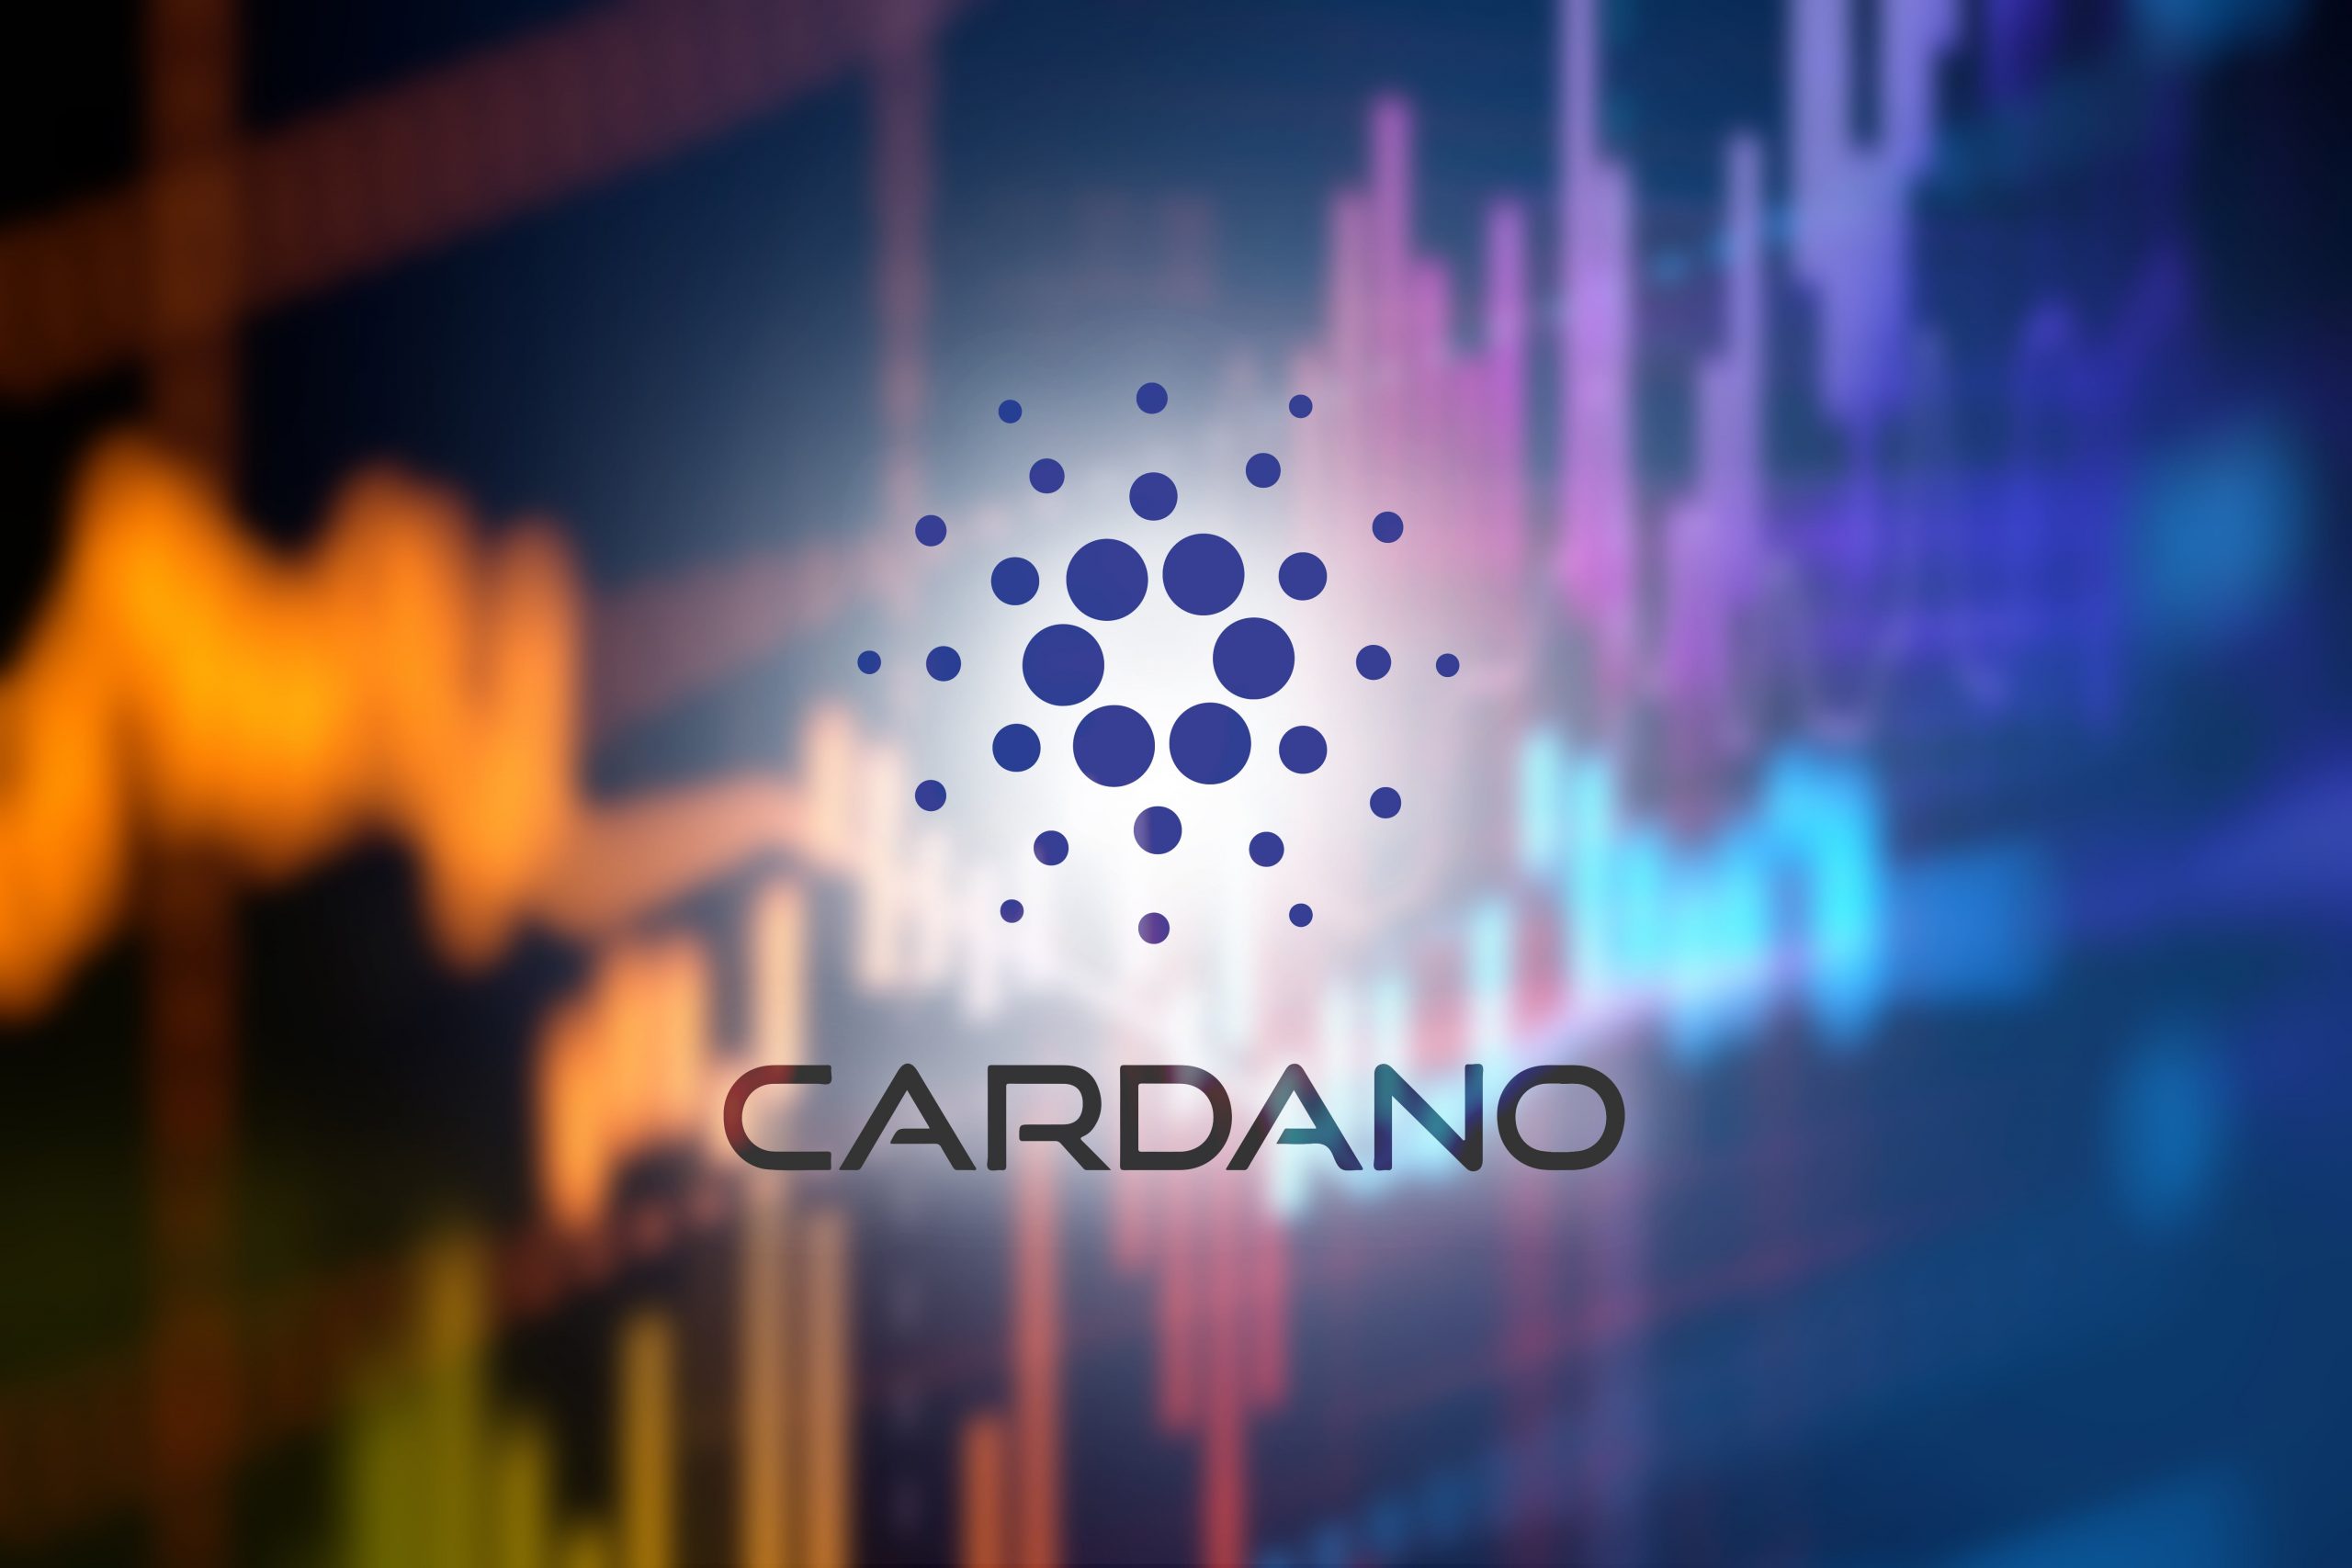 Cardano Crowned Most Active Blockchain by Santiment